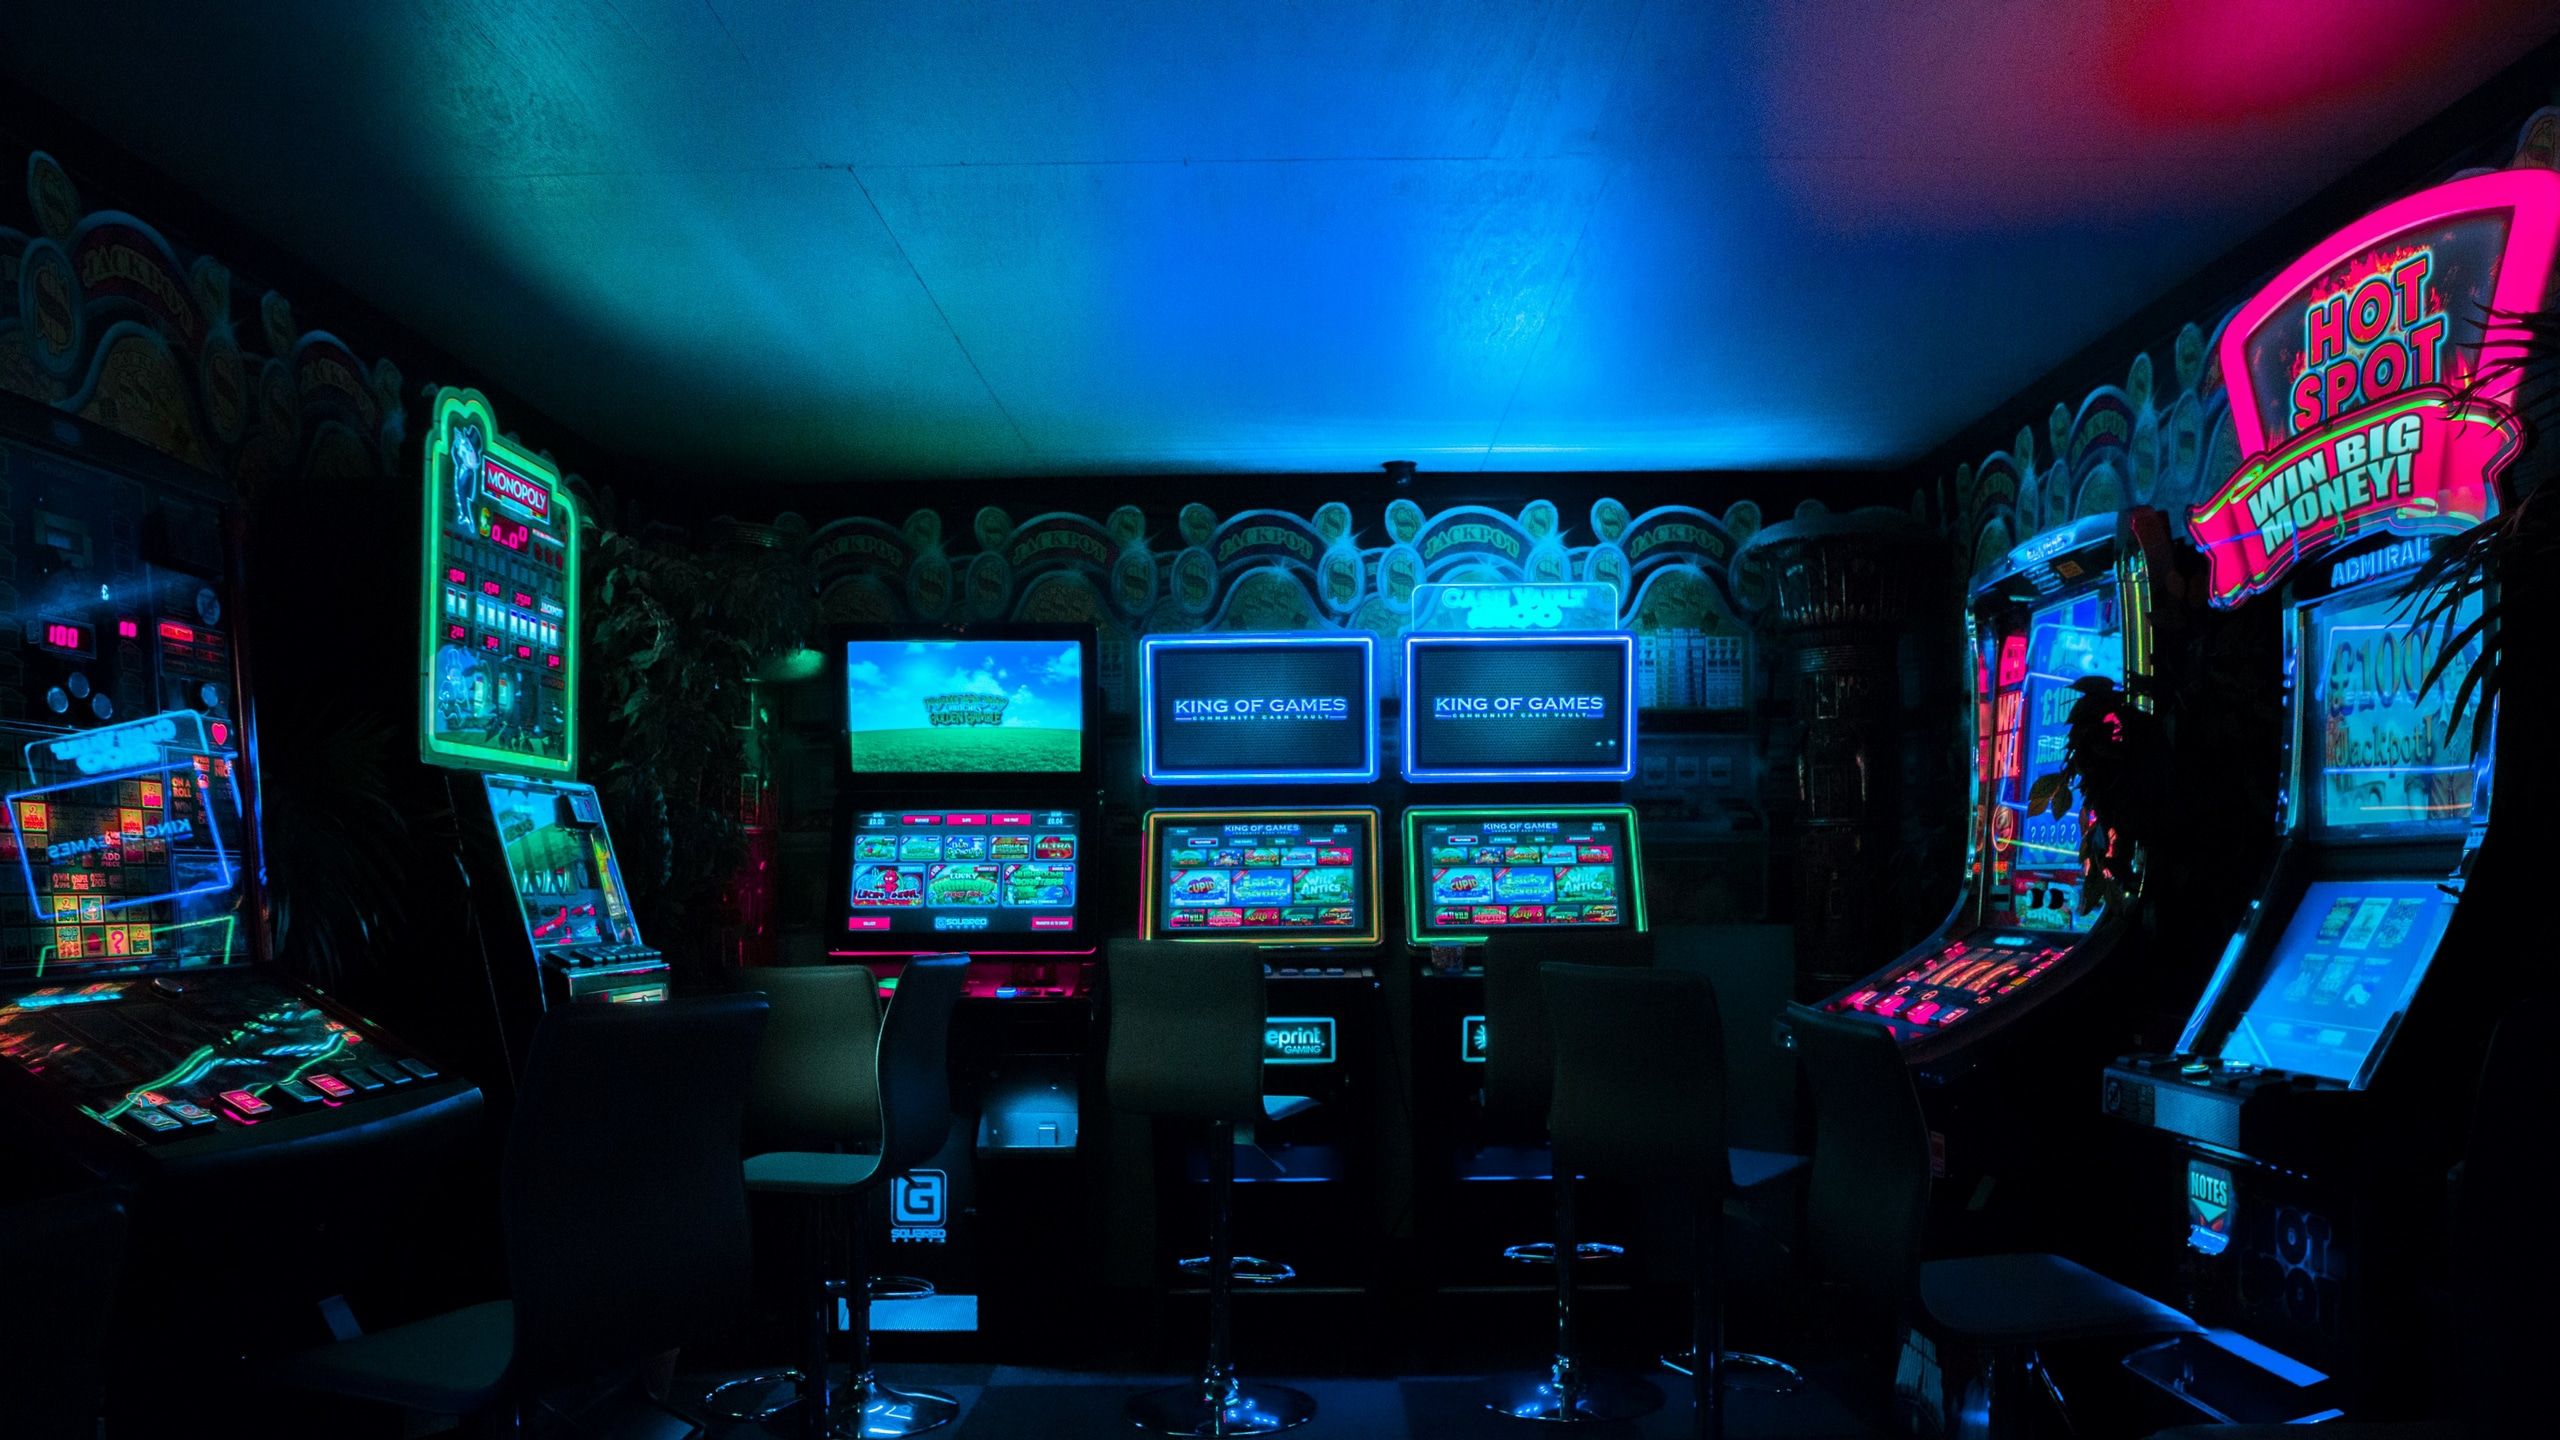 A dark room with multiple slot machines lit up by blue and pink lights. - Arcade